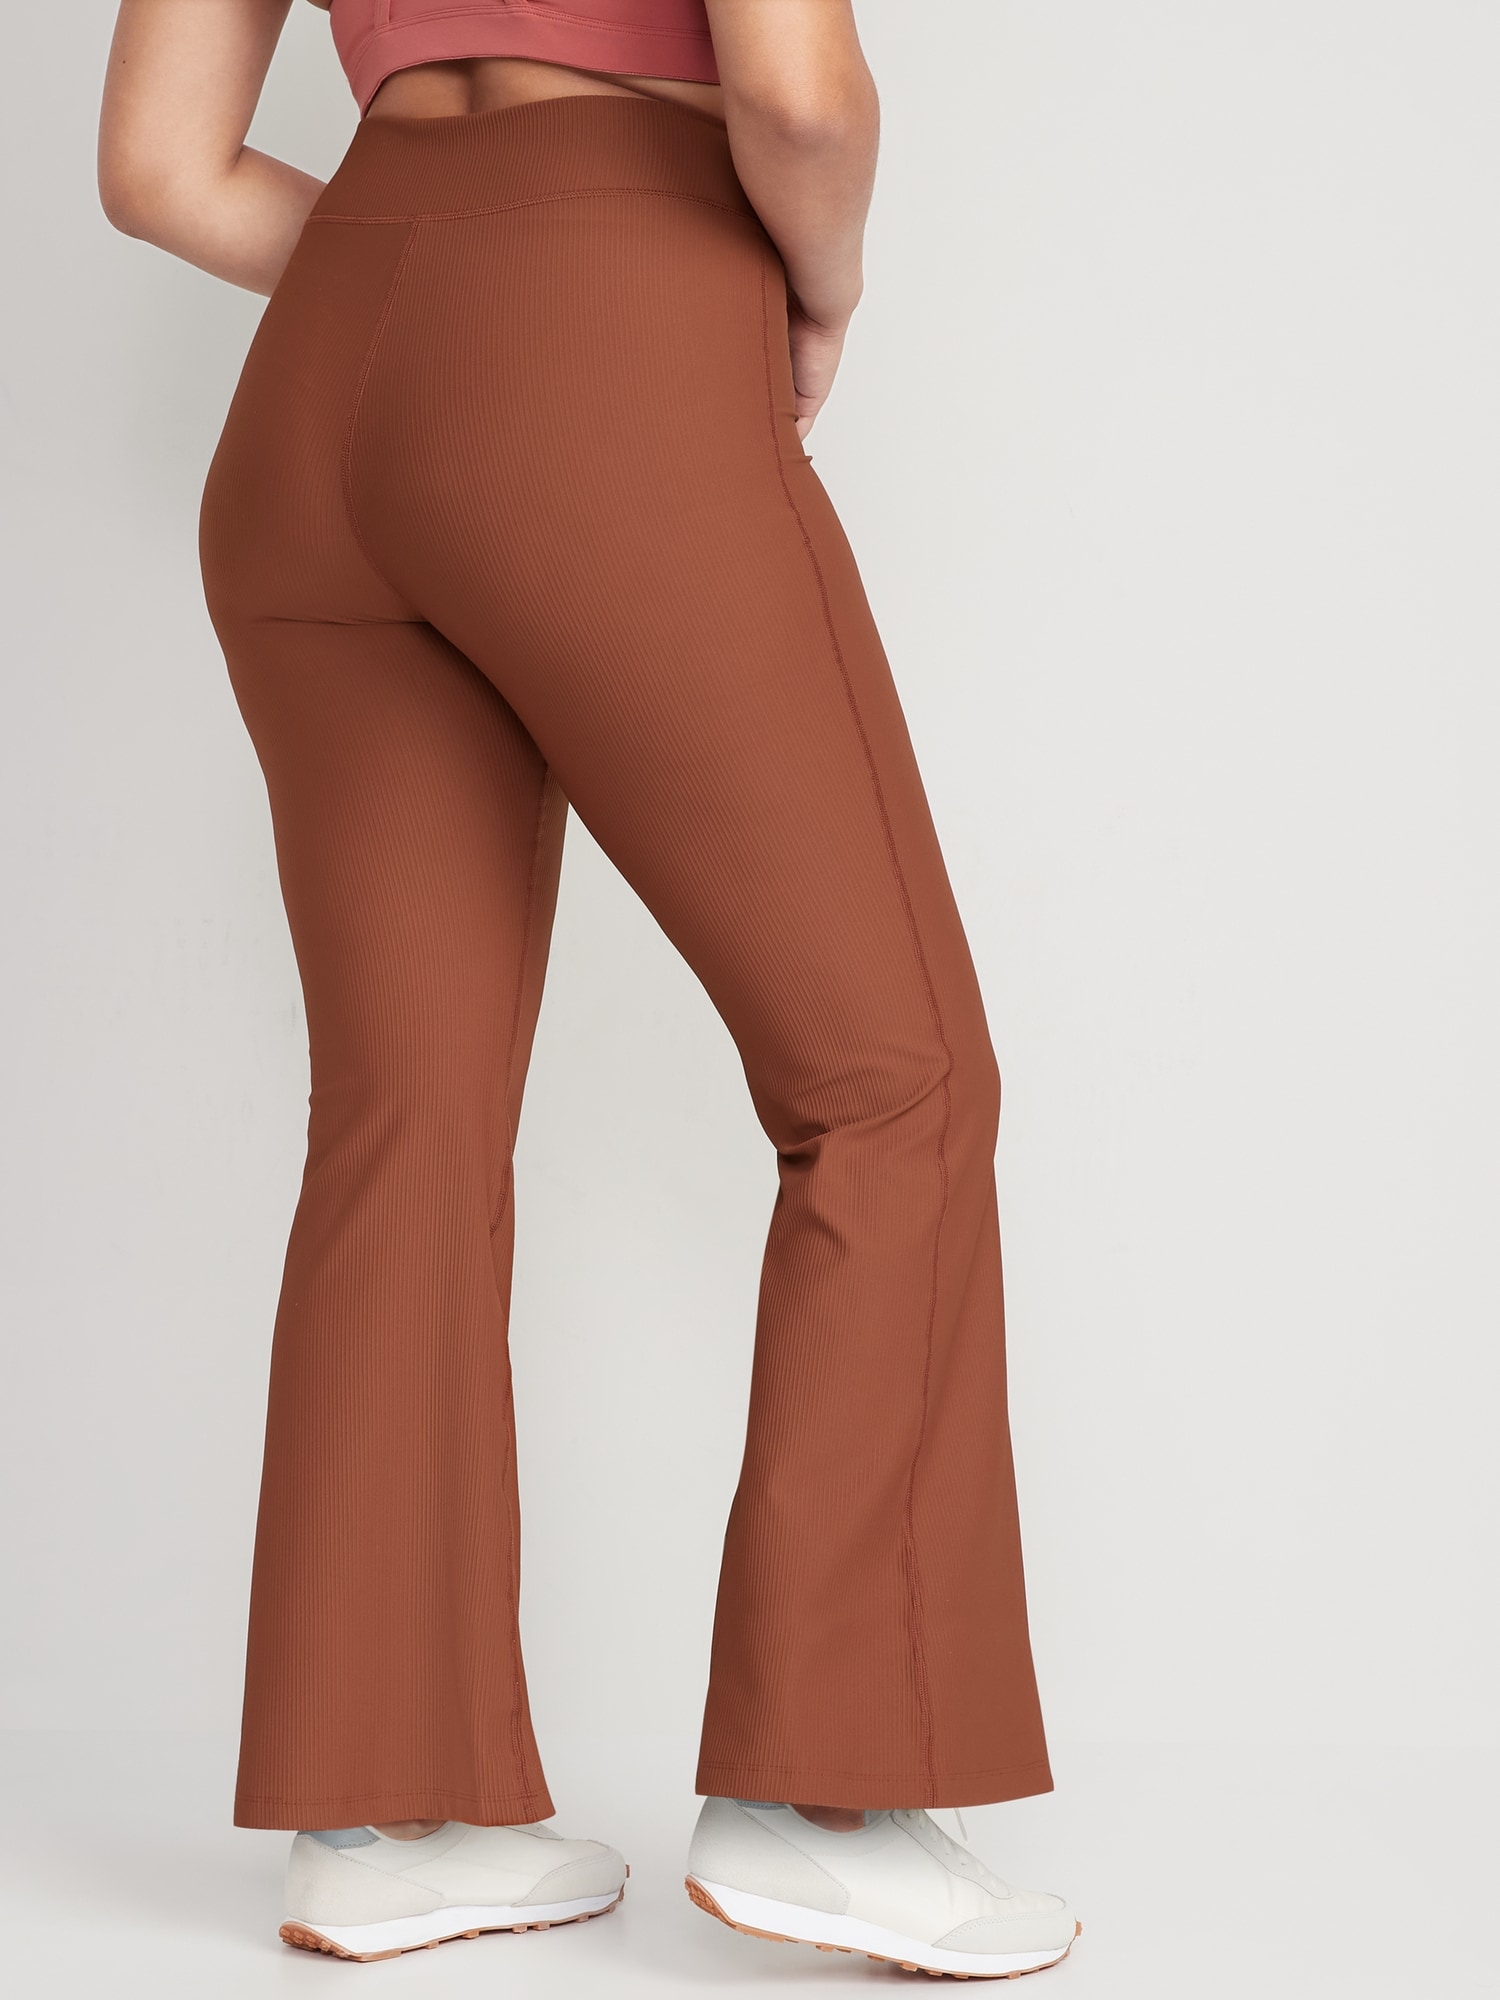 Rue21 Brown Ribbed Knit Flare Leggings